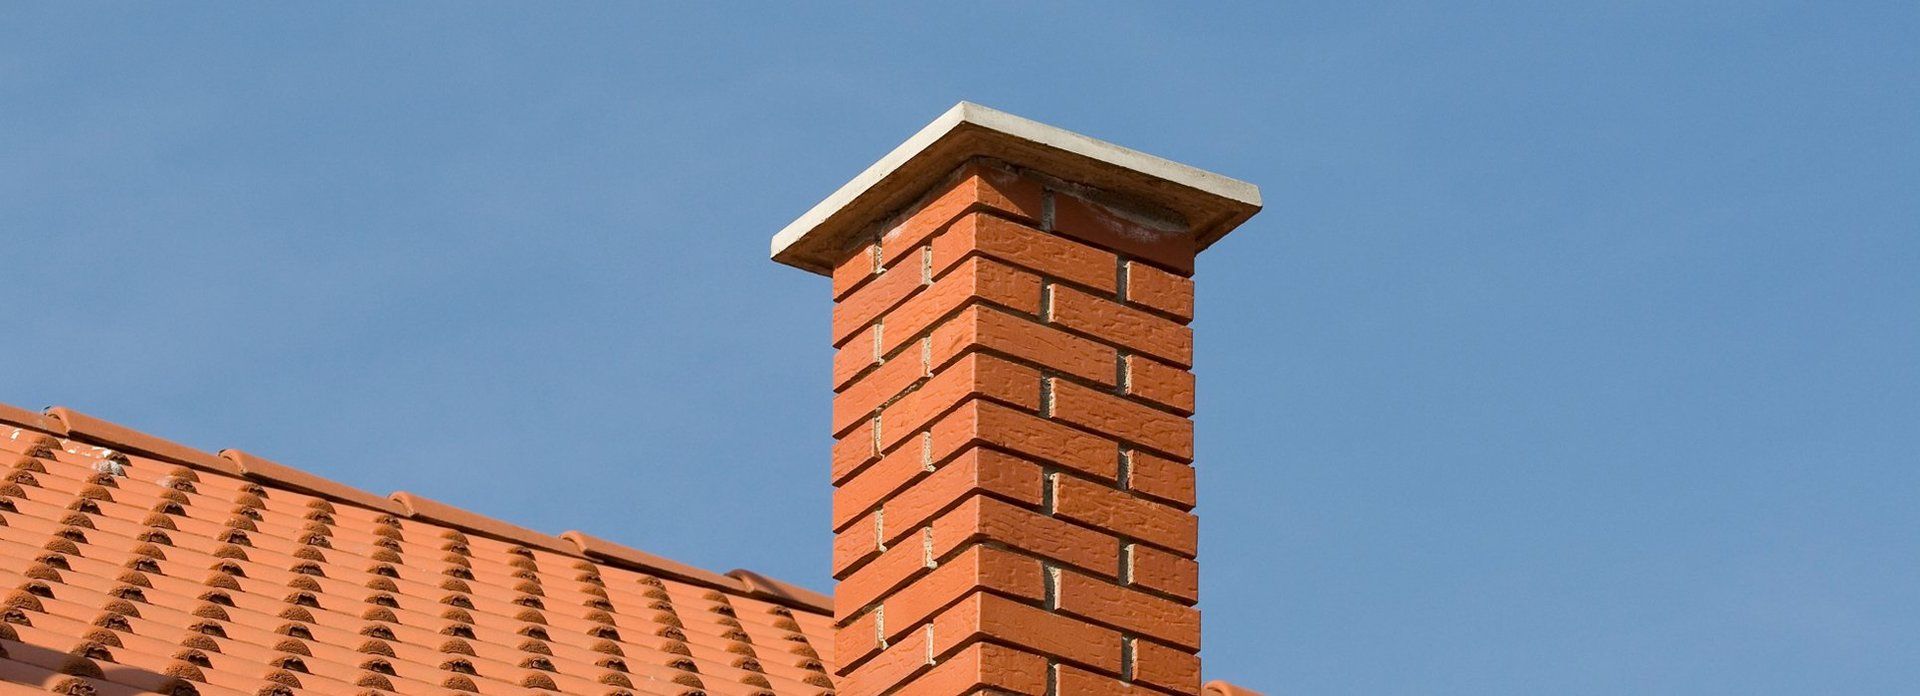 Affordable Chimney Sweep Chimney Services Pittsburgh, PA